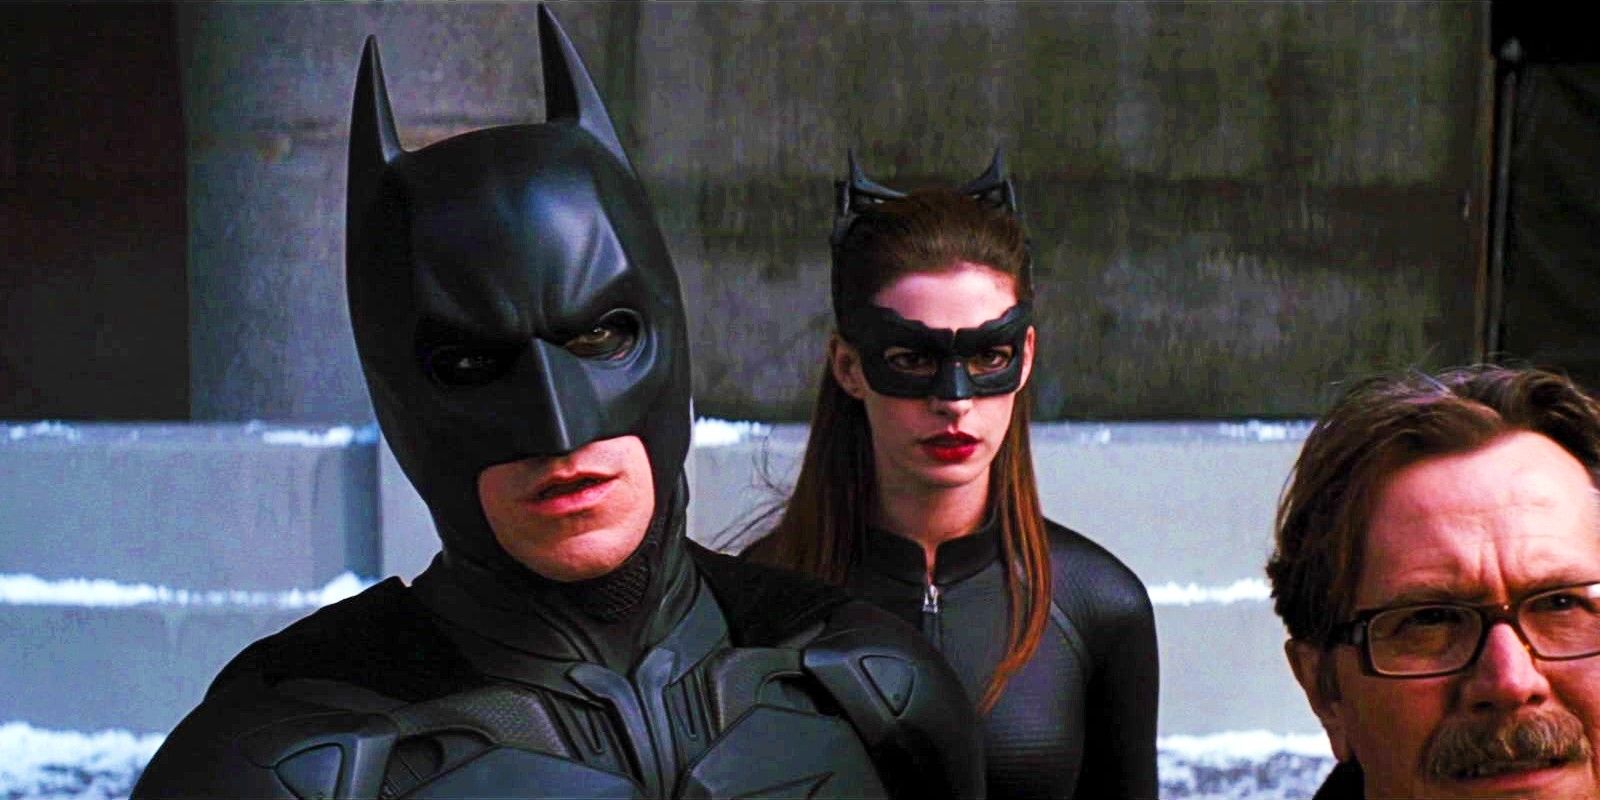 Christian Bale As Bruce Wayne In Full Batman Costume With Anne Hathaway In Catwoman Costume In The Dark Knight Rises